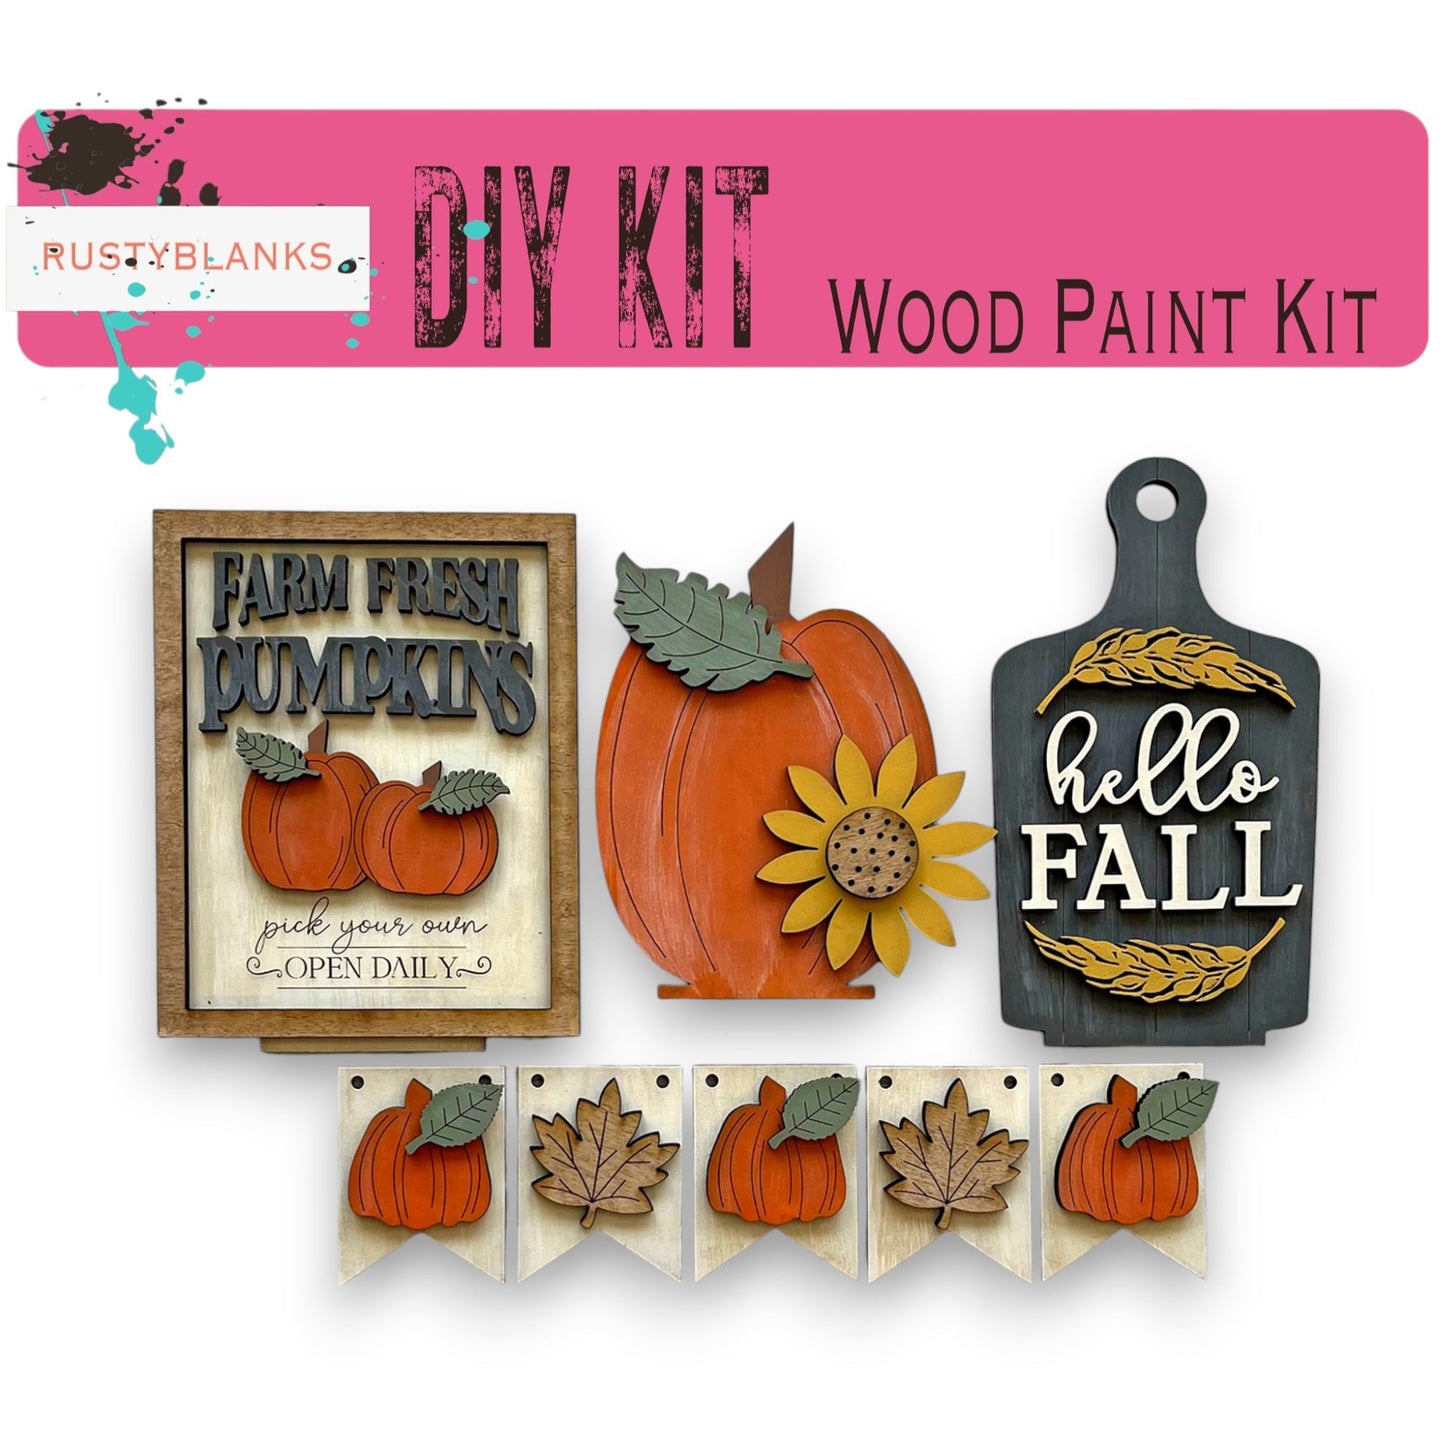 a picture of a wooden fall kit